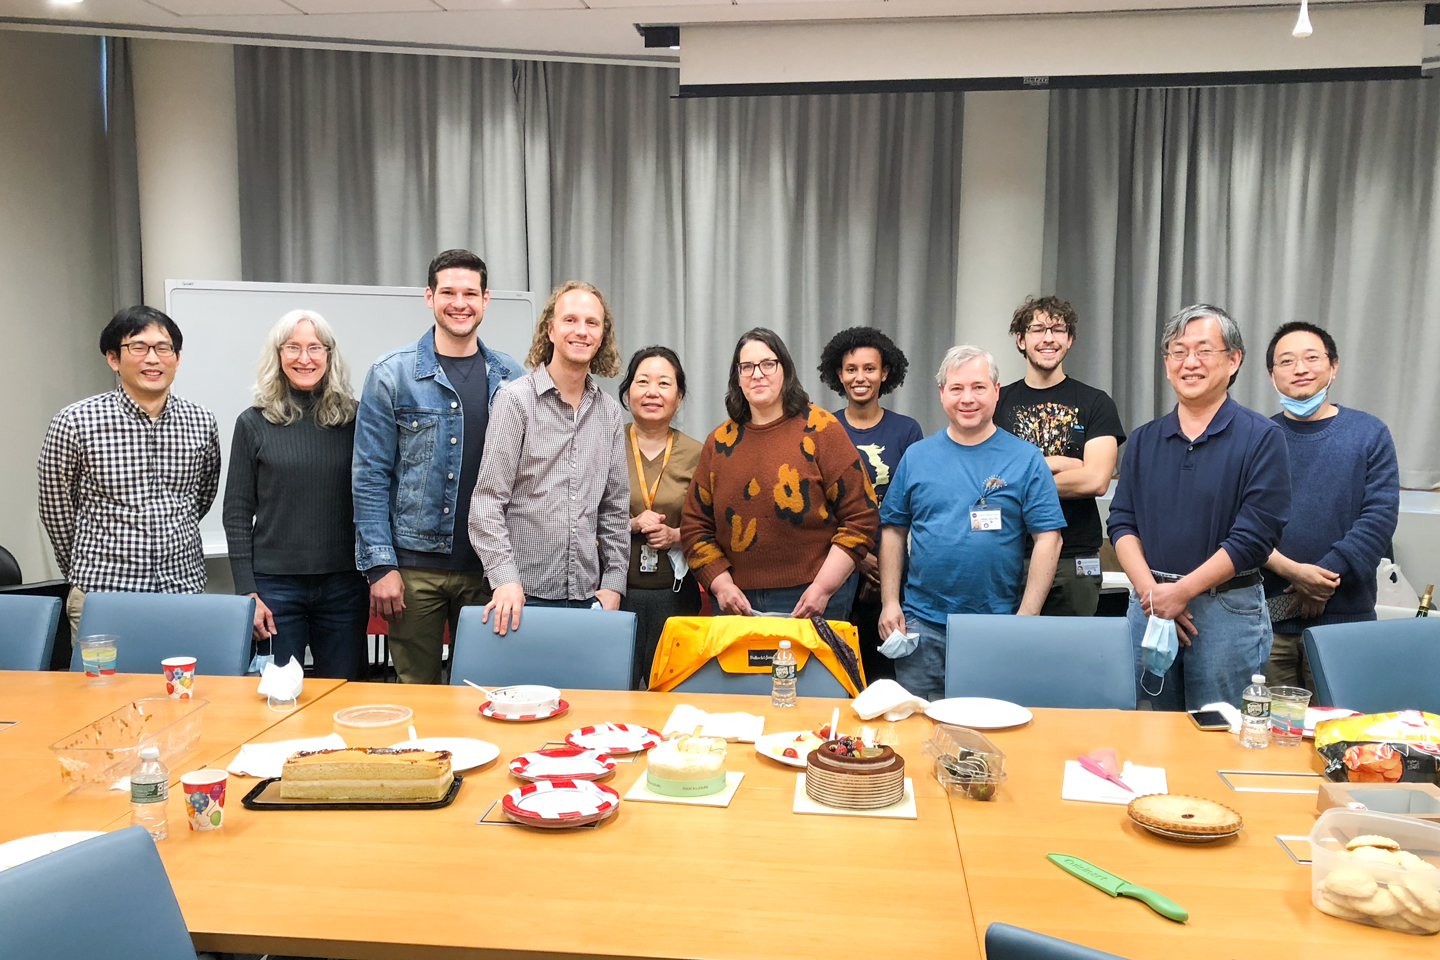 Members of the Wang Lab Celebrate with Cake in a Conference Room